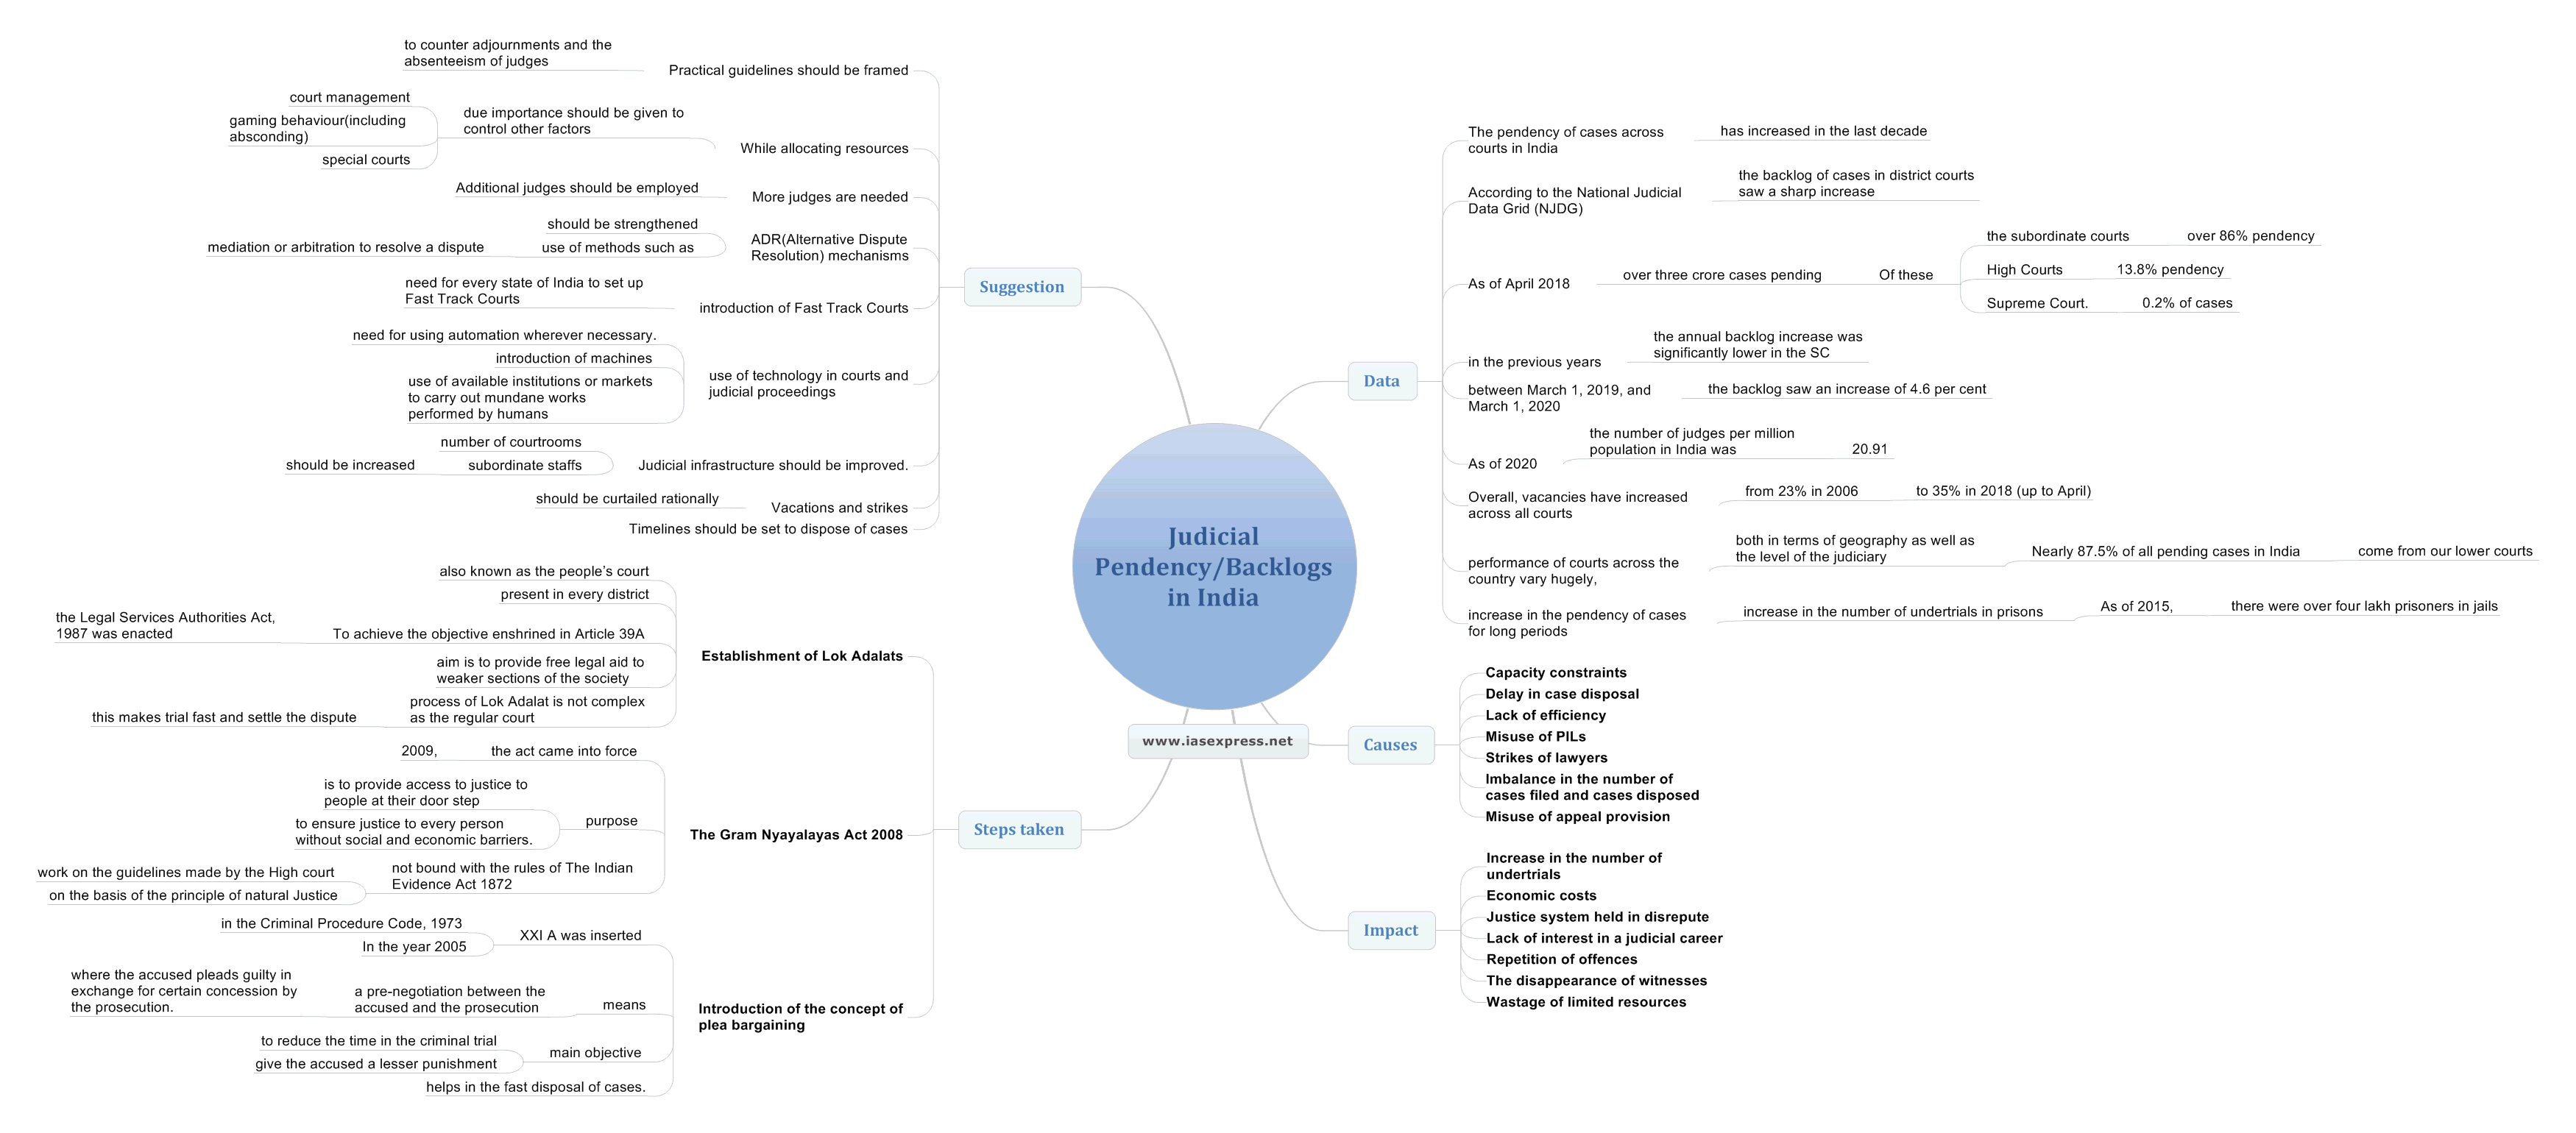 Judicial-Pendency.Backlogs-in-India mindmap